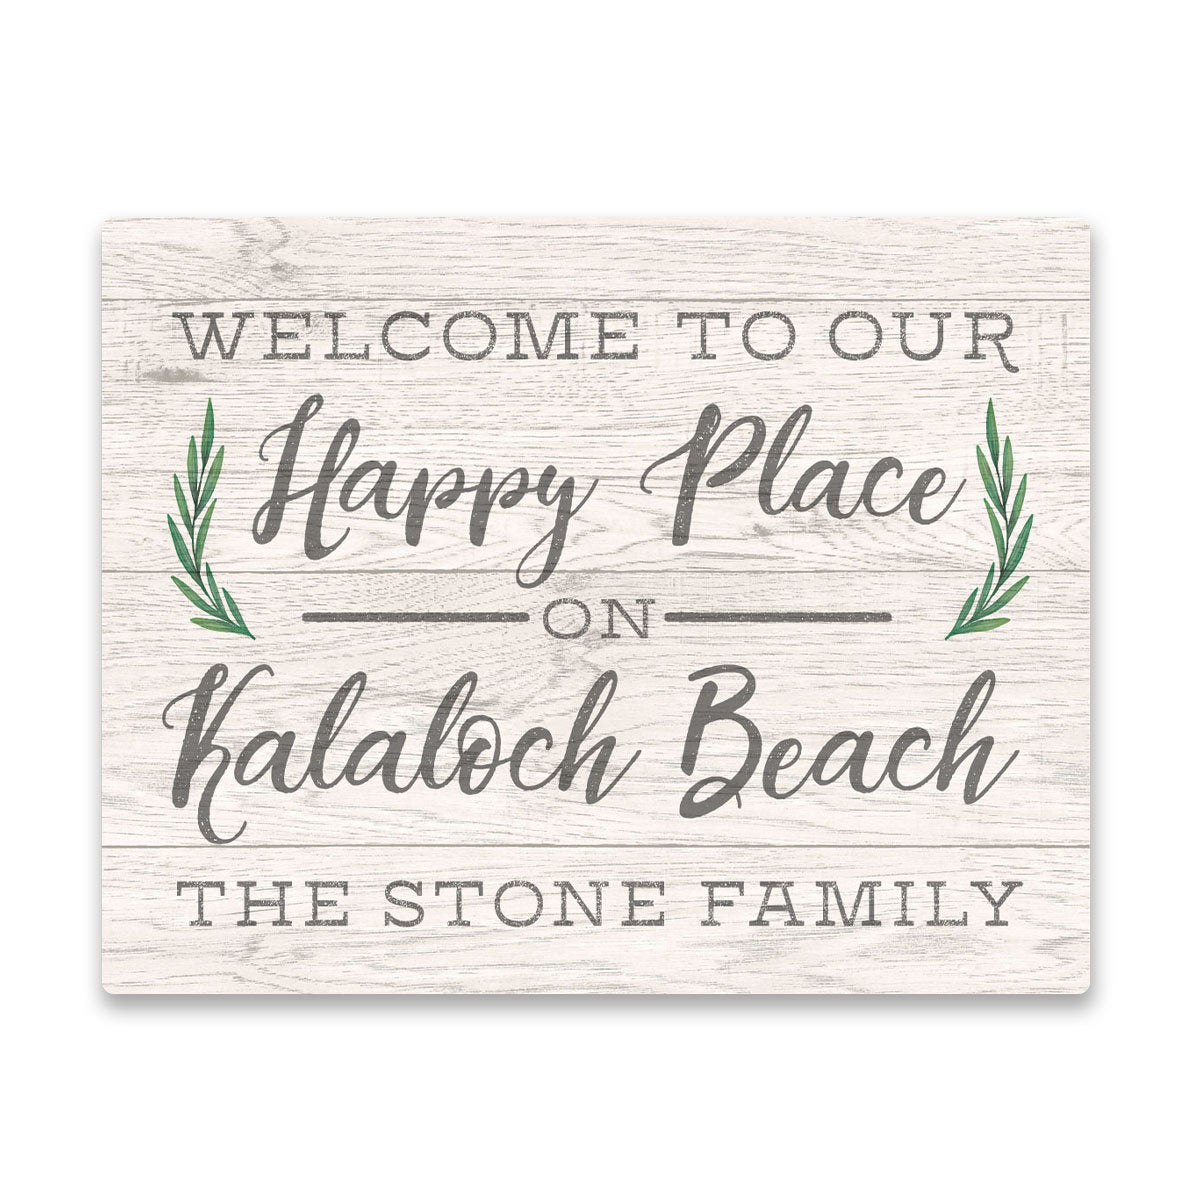 Personalized Welcome to Our Happy Place On Kalaloch Beach Wall Art